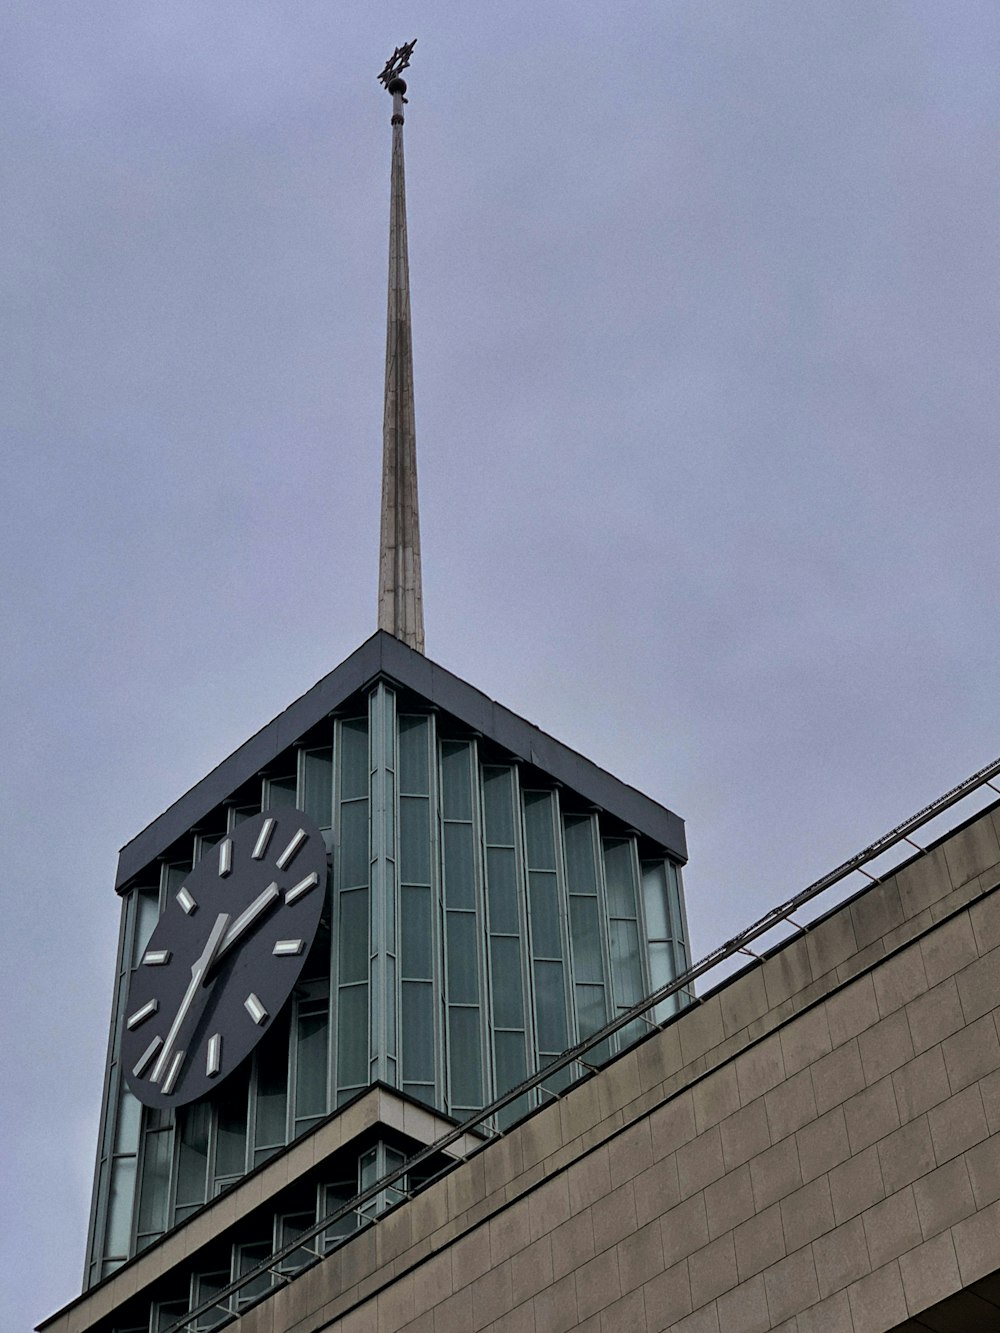 a clock on a tower